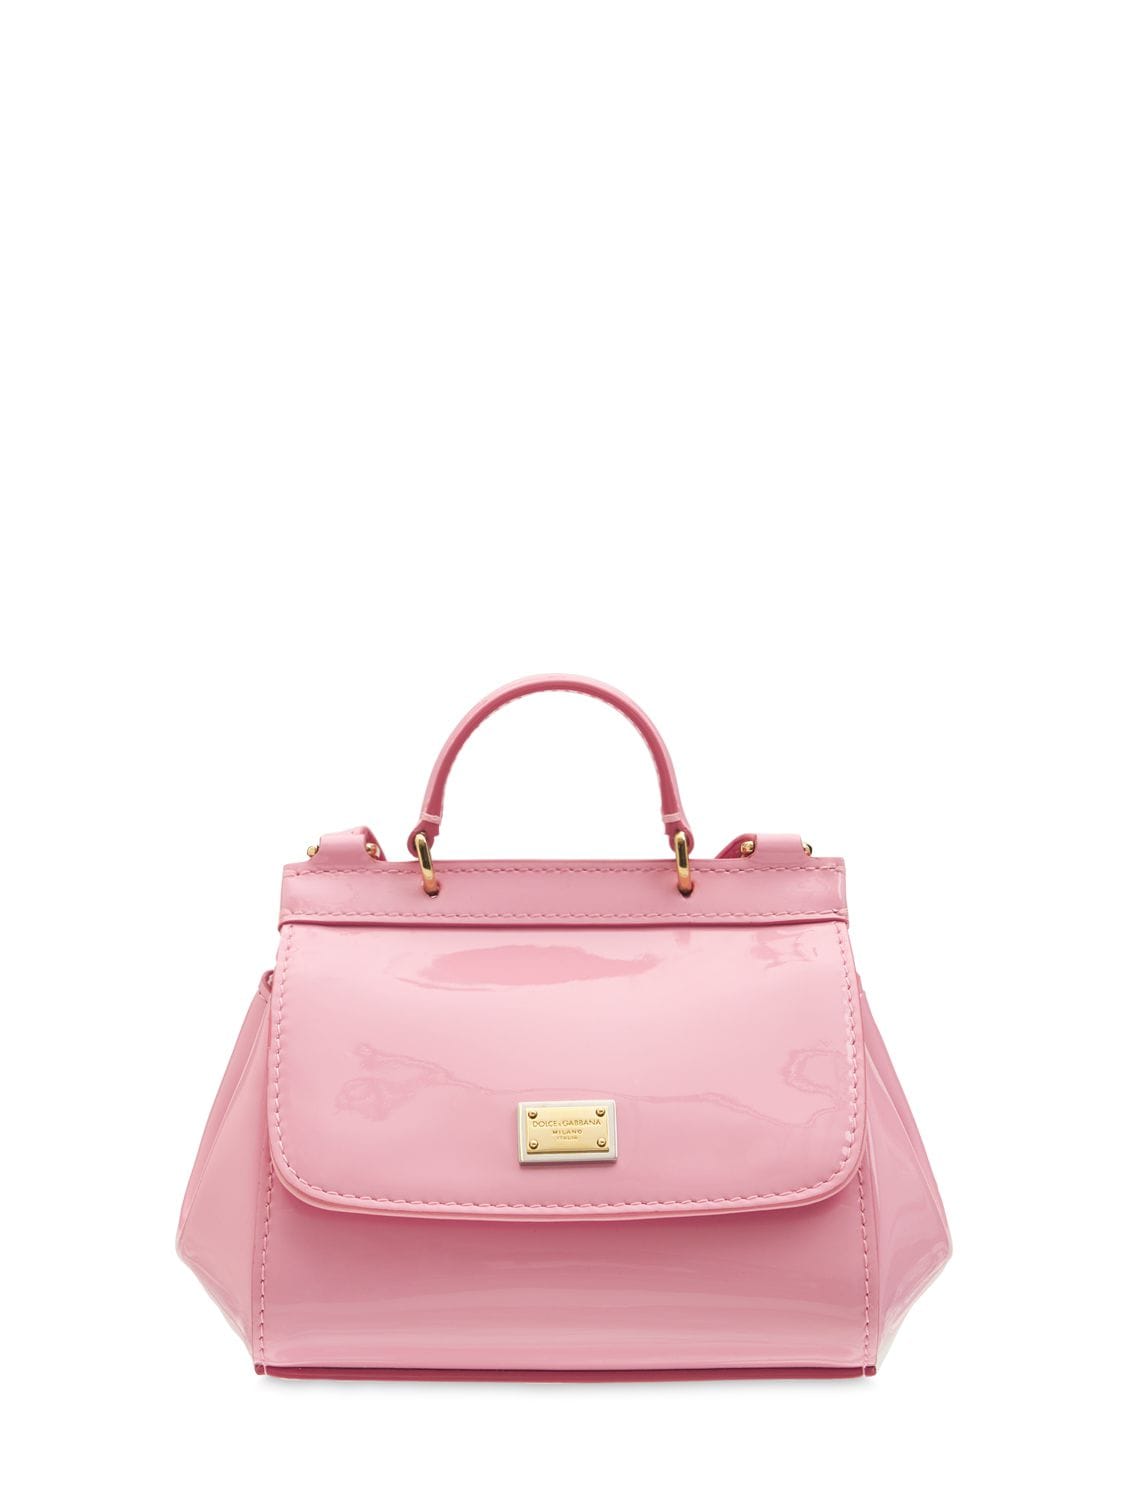 Dolce & Gabbana Kids Patent Leather Tote Bag - Pink